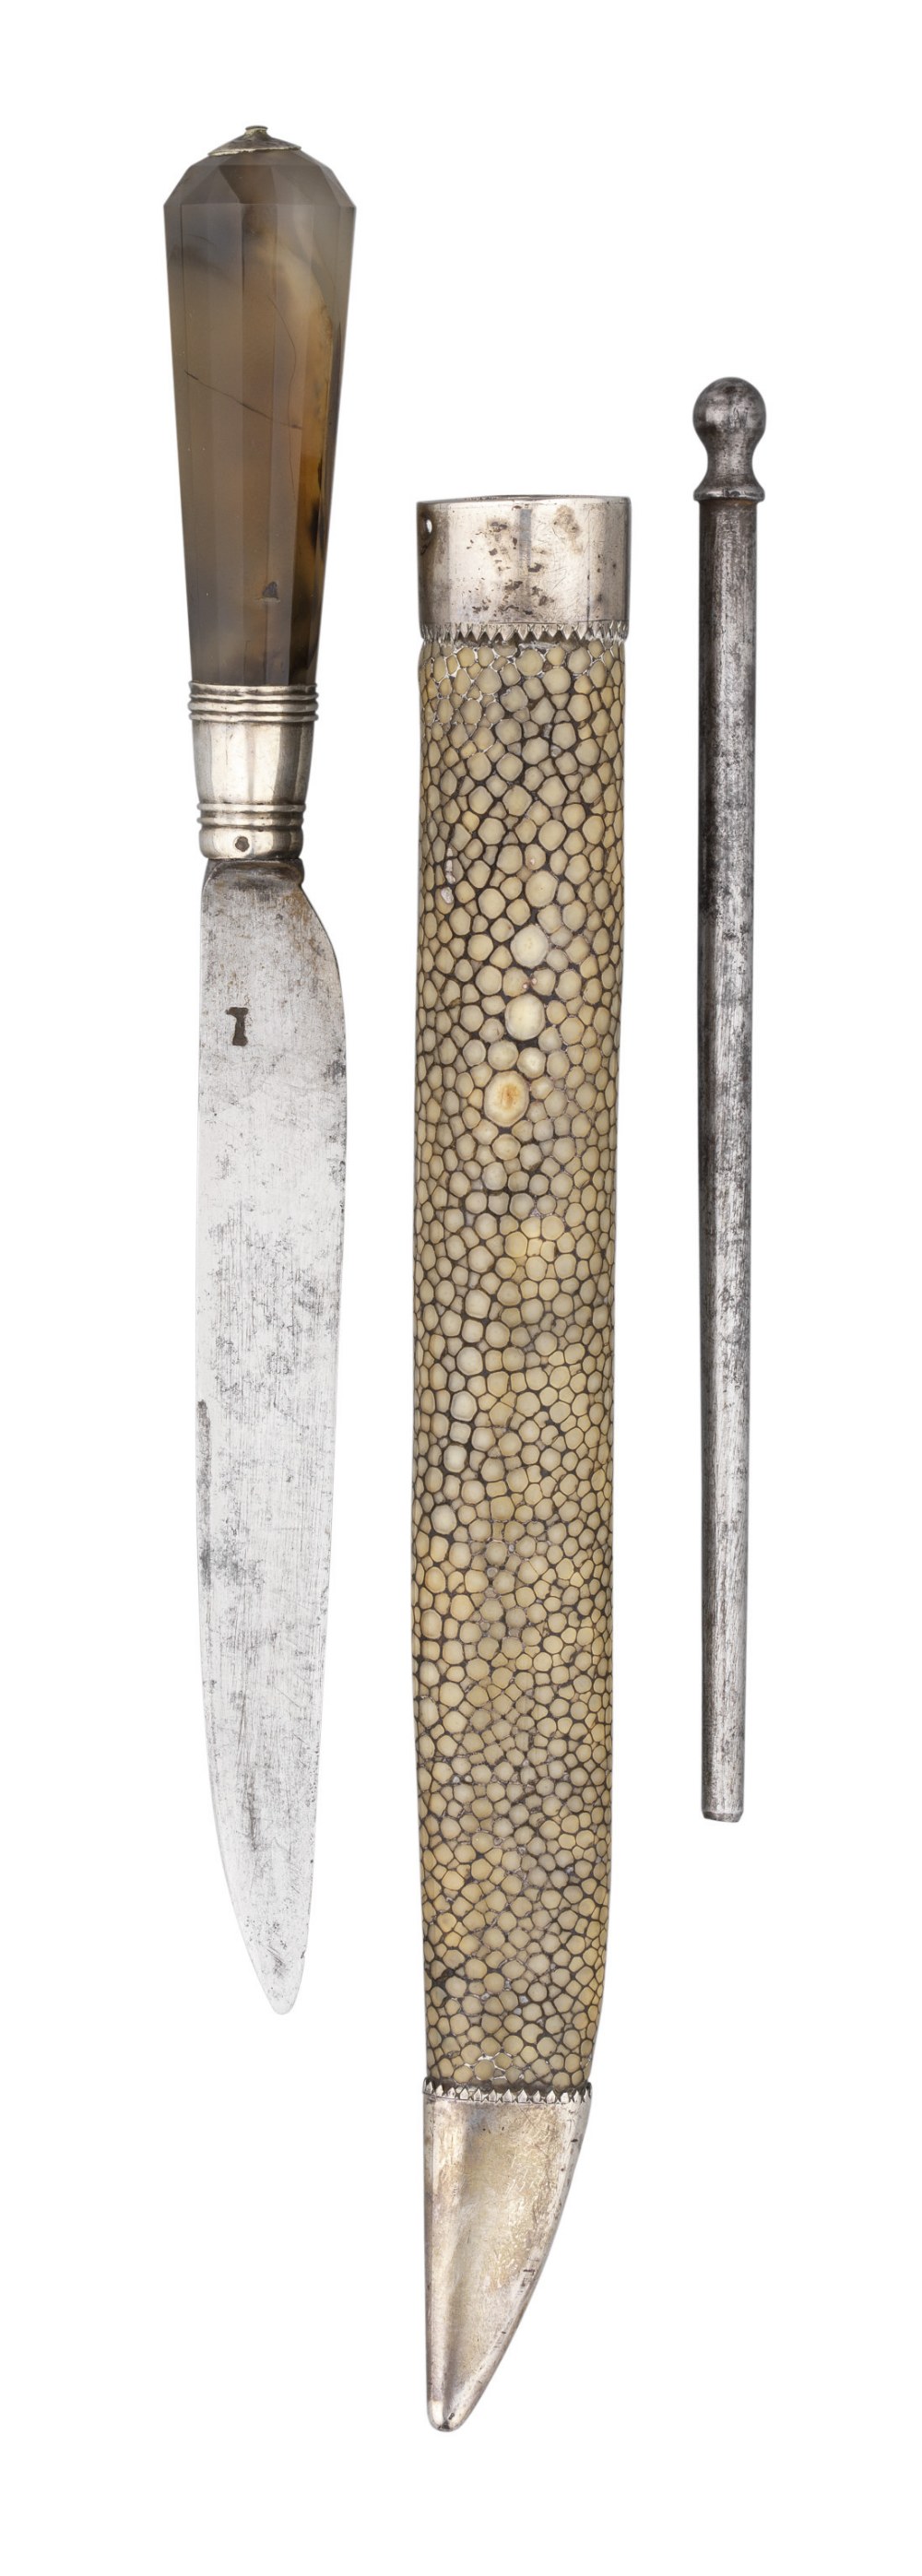 A CONTINENTAL SILVER-MOUNTED SMALL TROUSSE, LATE 18TH CENTURY comprising knife struck with a mark on